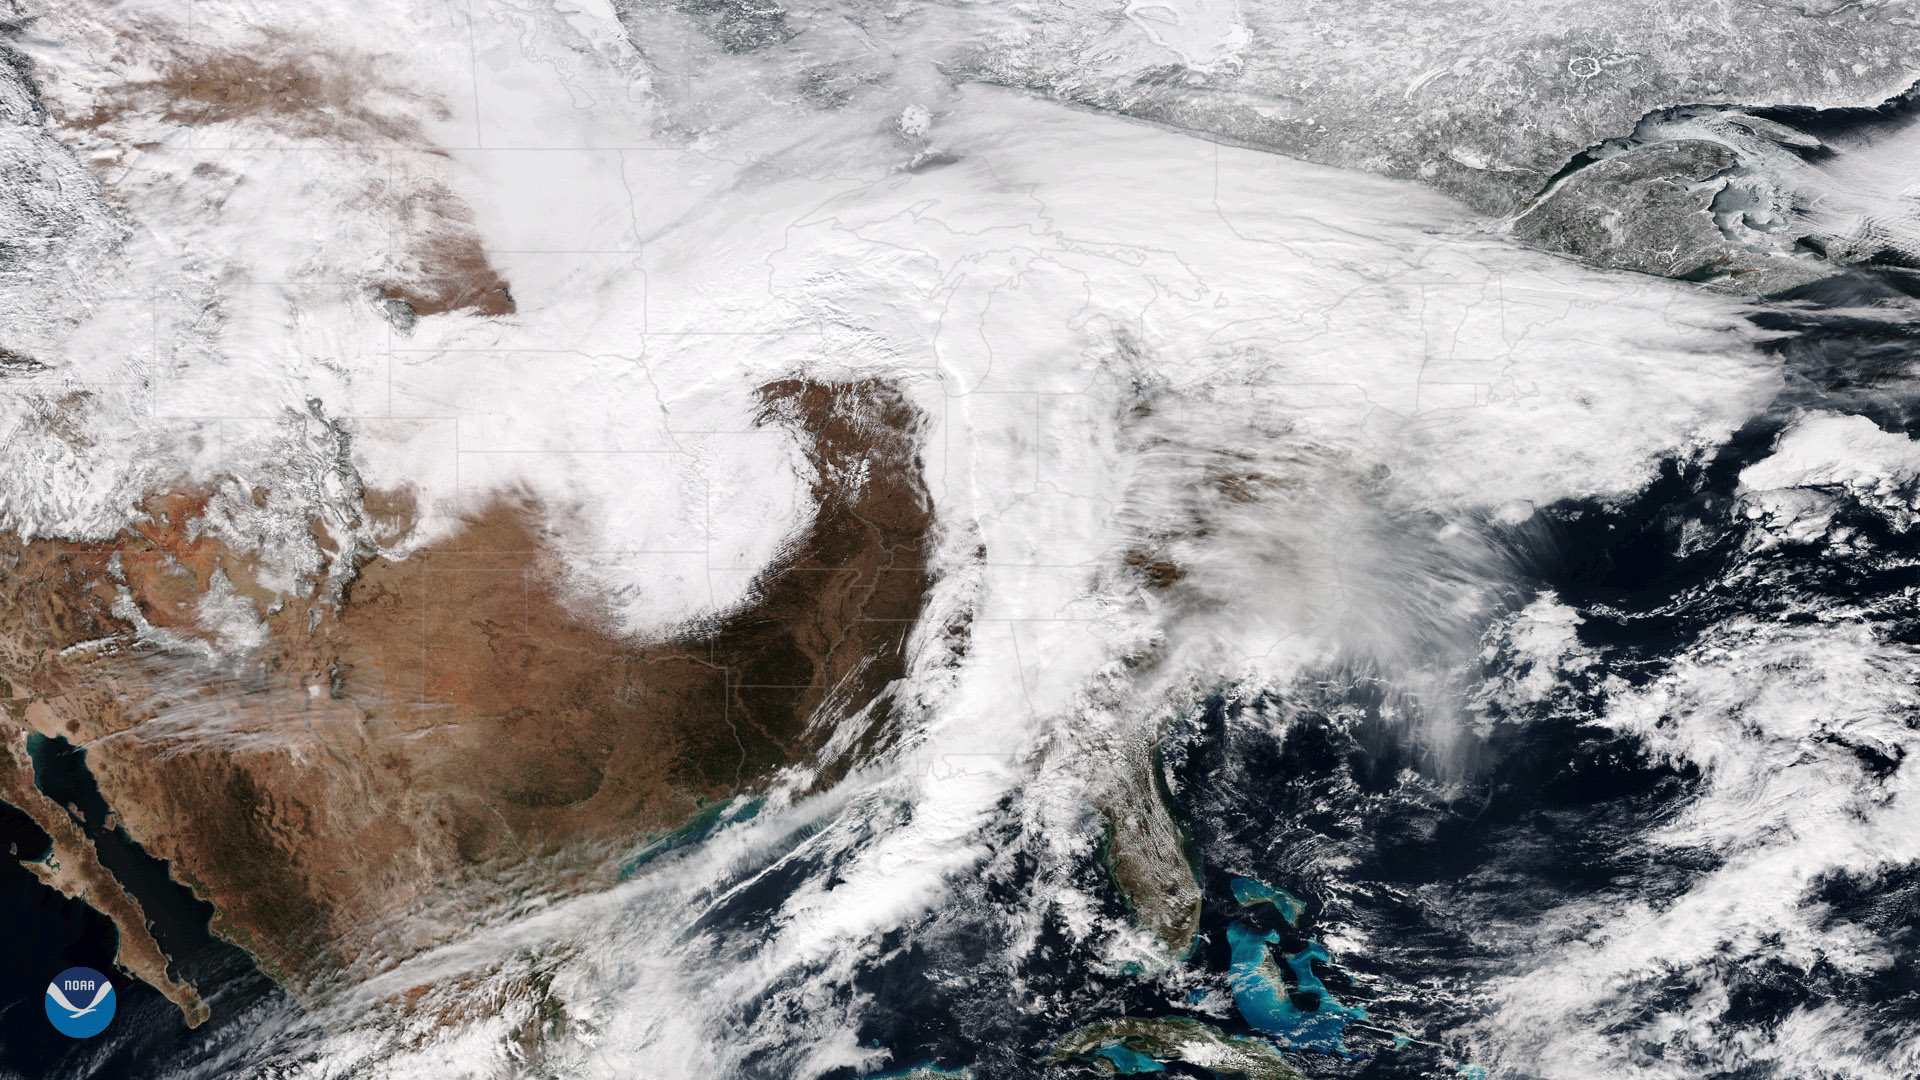 Winter Storm Brings Snow, Whiteout Conditions to the Central U.S.